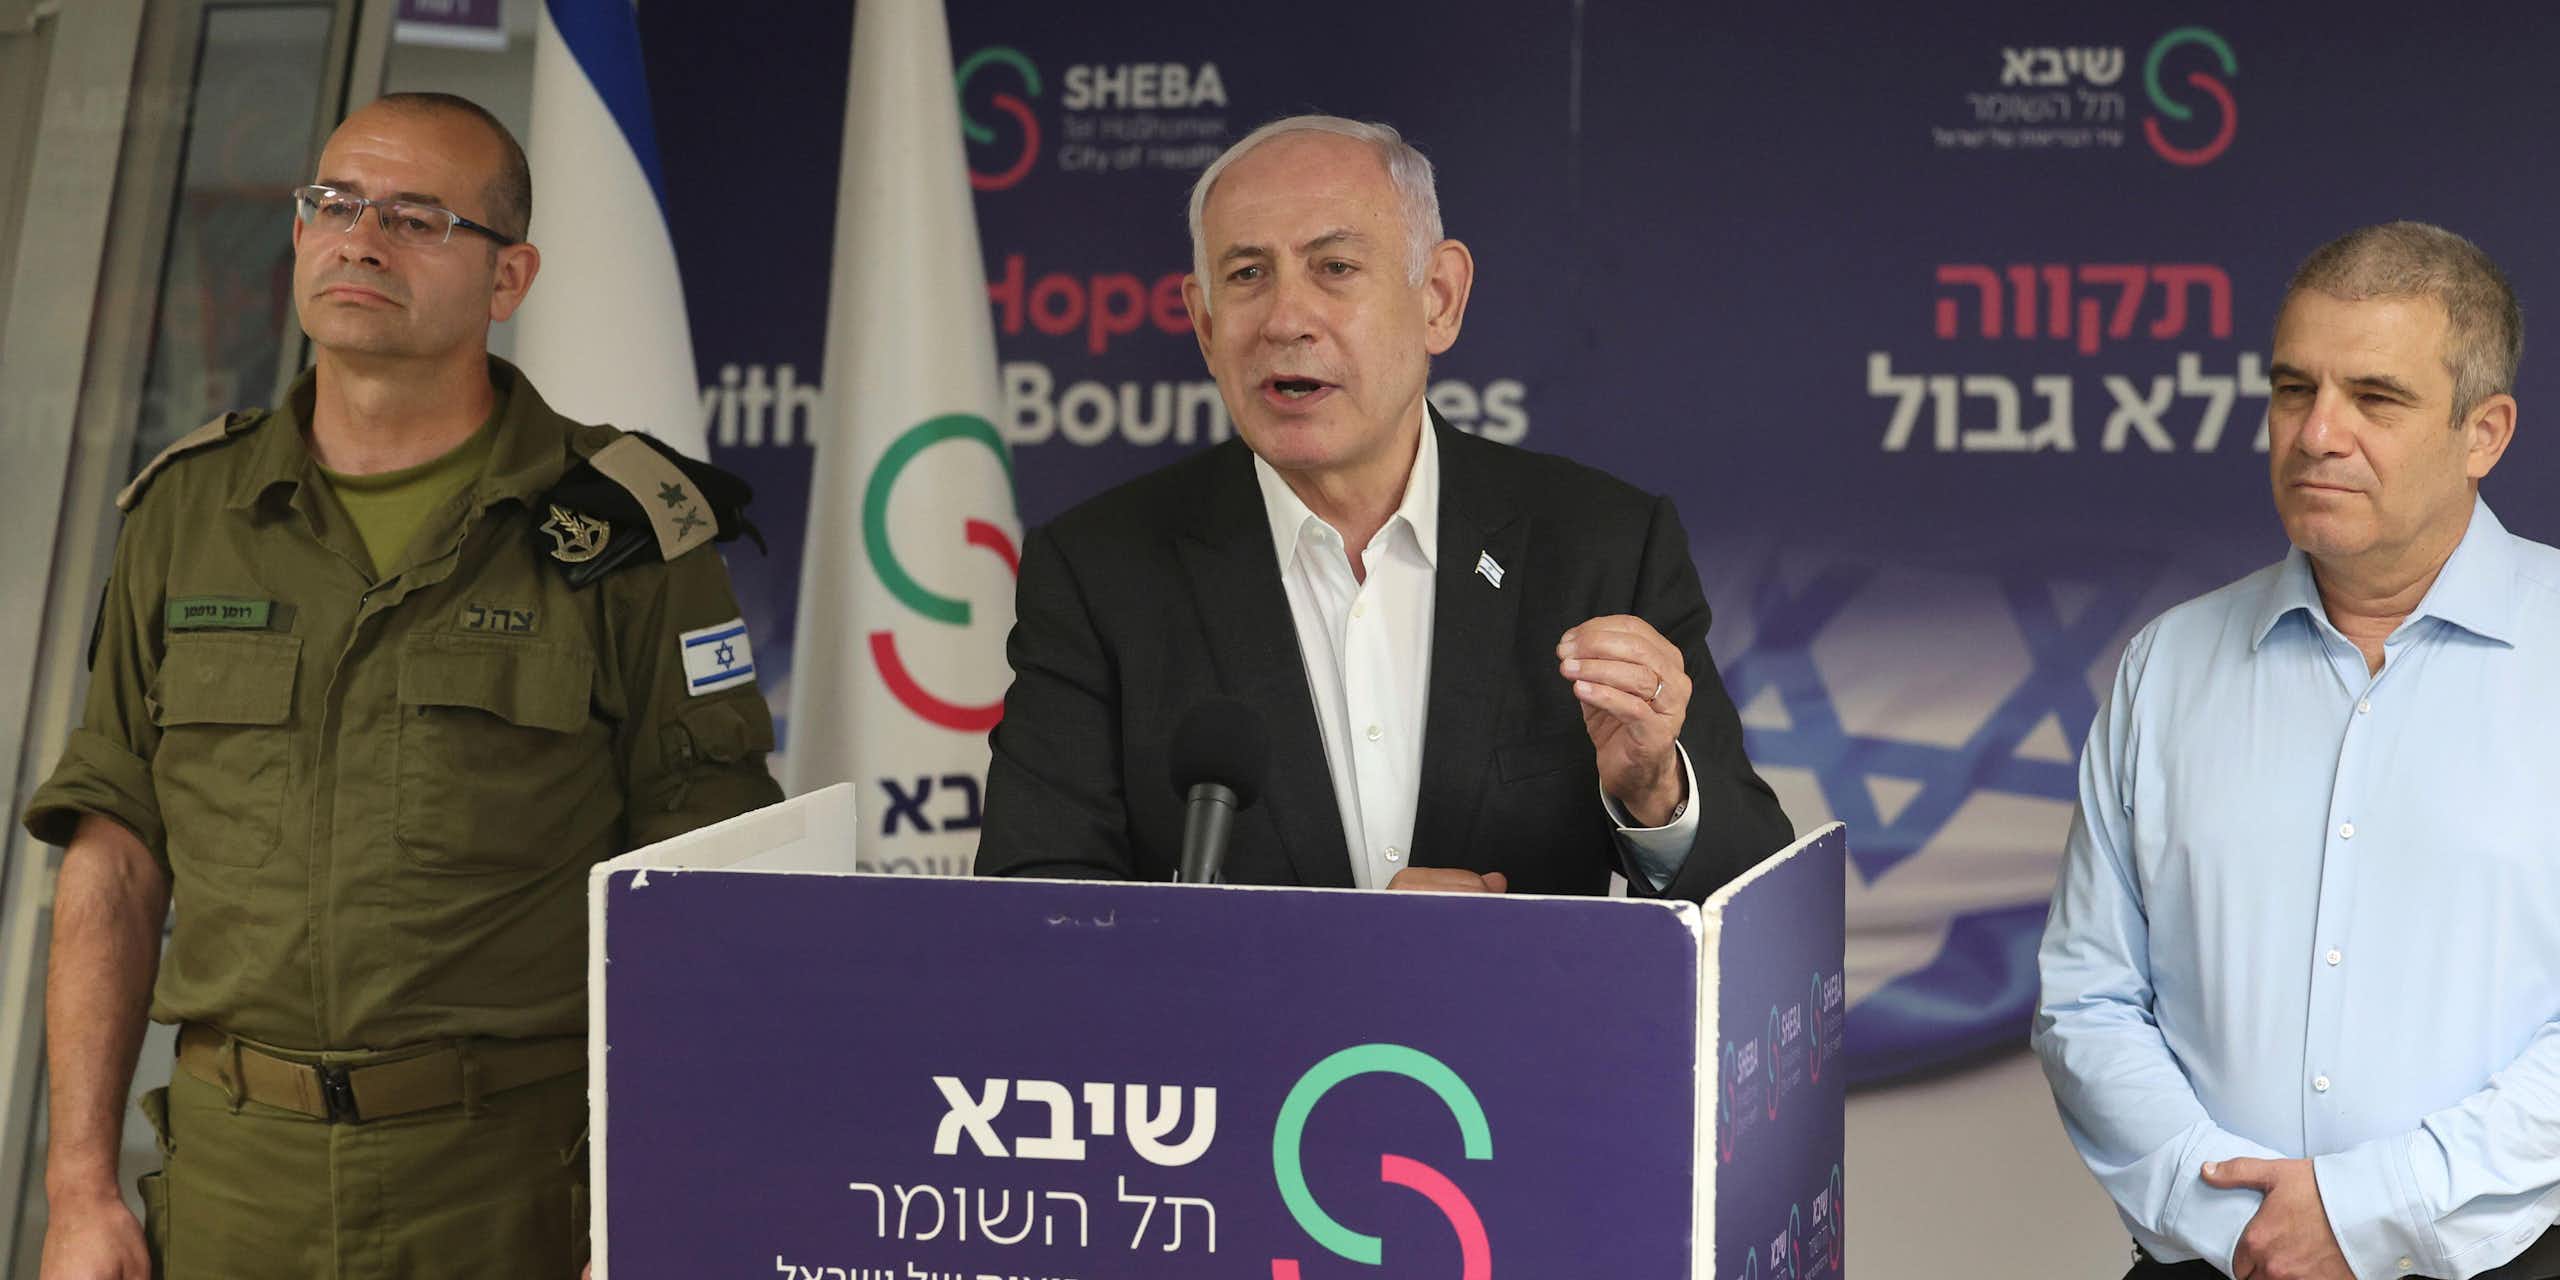 Israeli prime minister Benjamin Netanyahu delivers a speech from a podium, flanked by a military and a political aide.